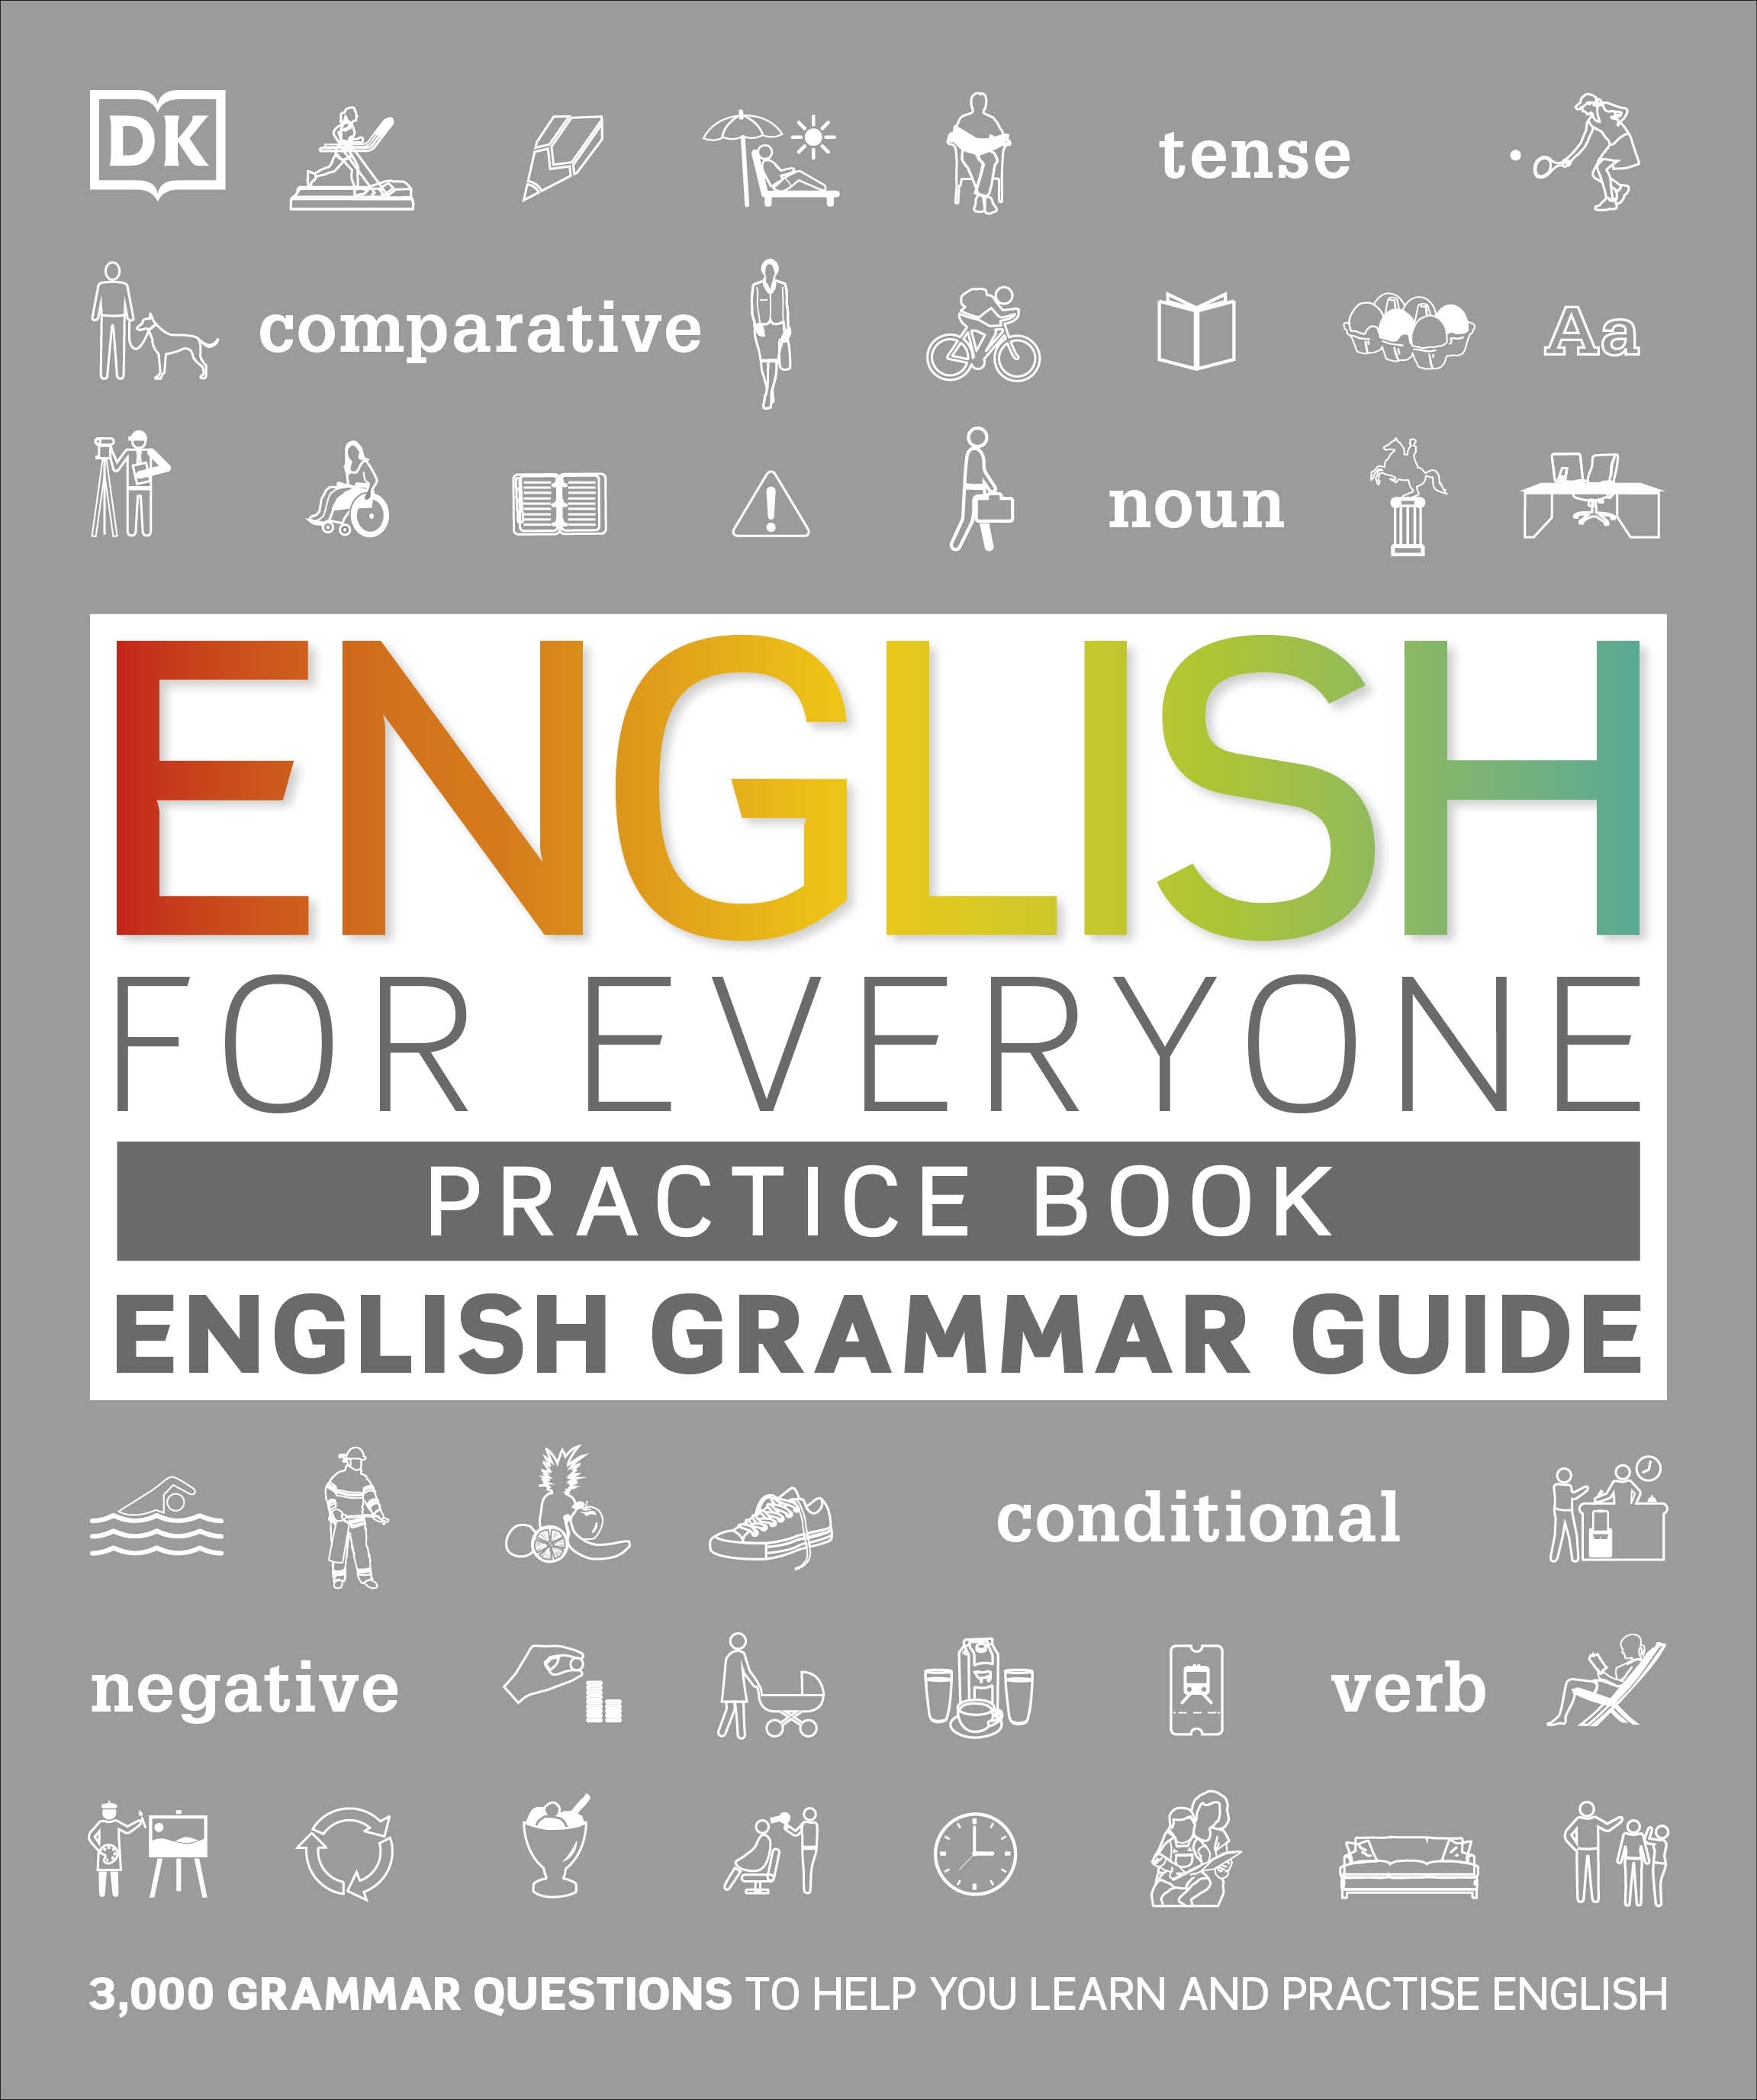 English For Everyone English Grammar Guide Practice Book By DK Penguin Books Australia